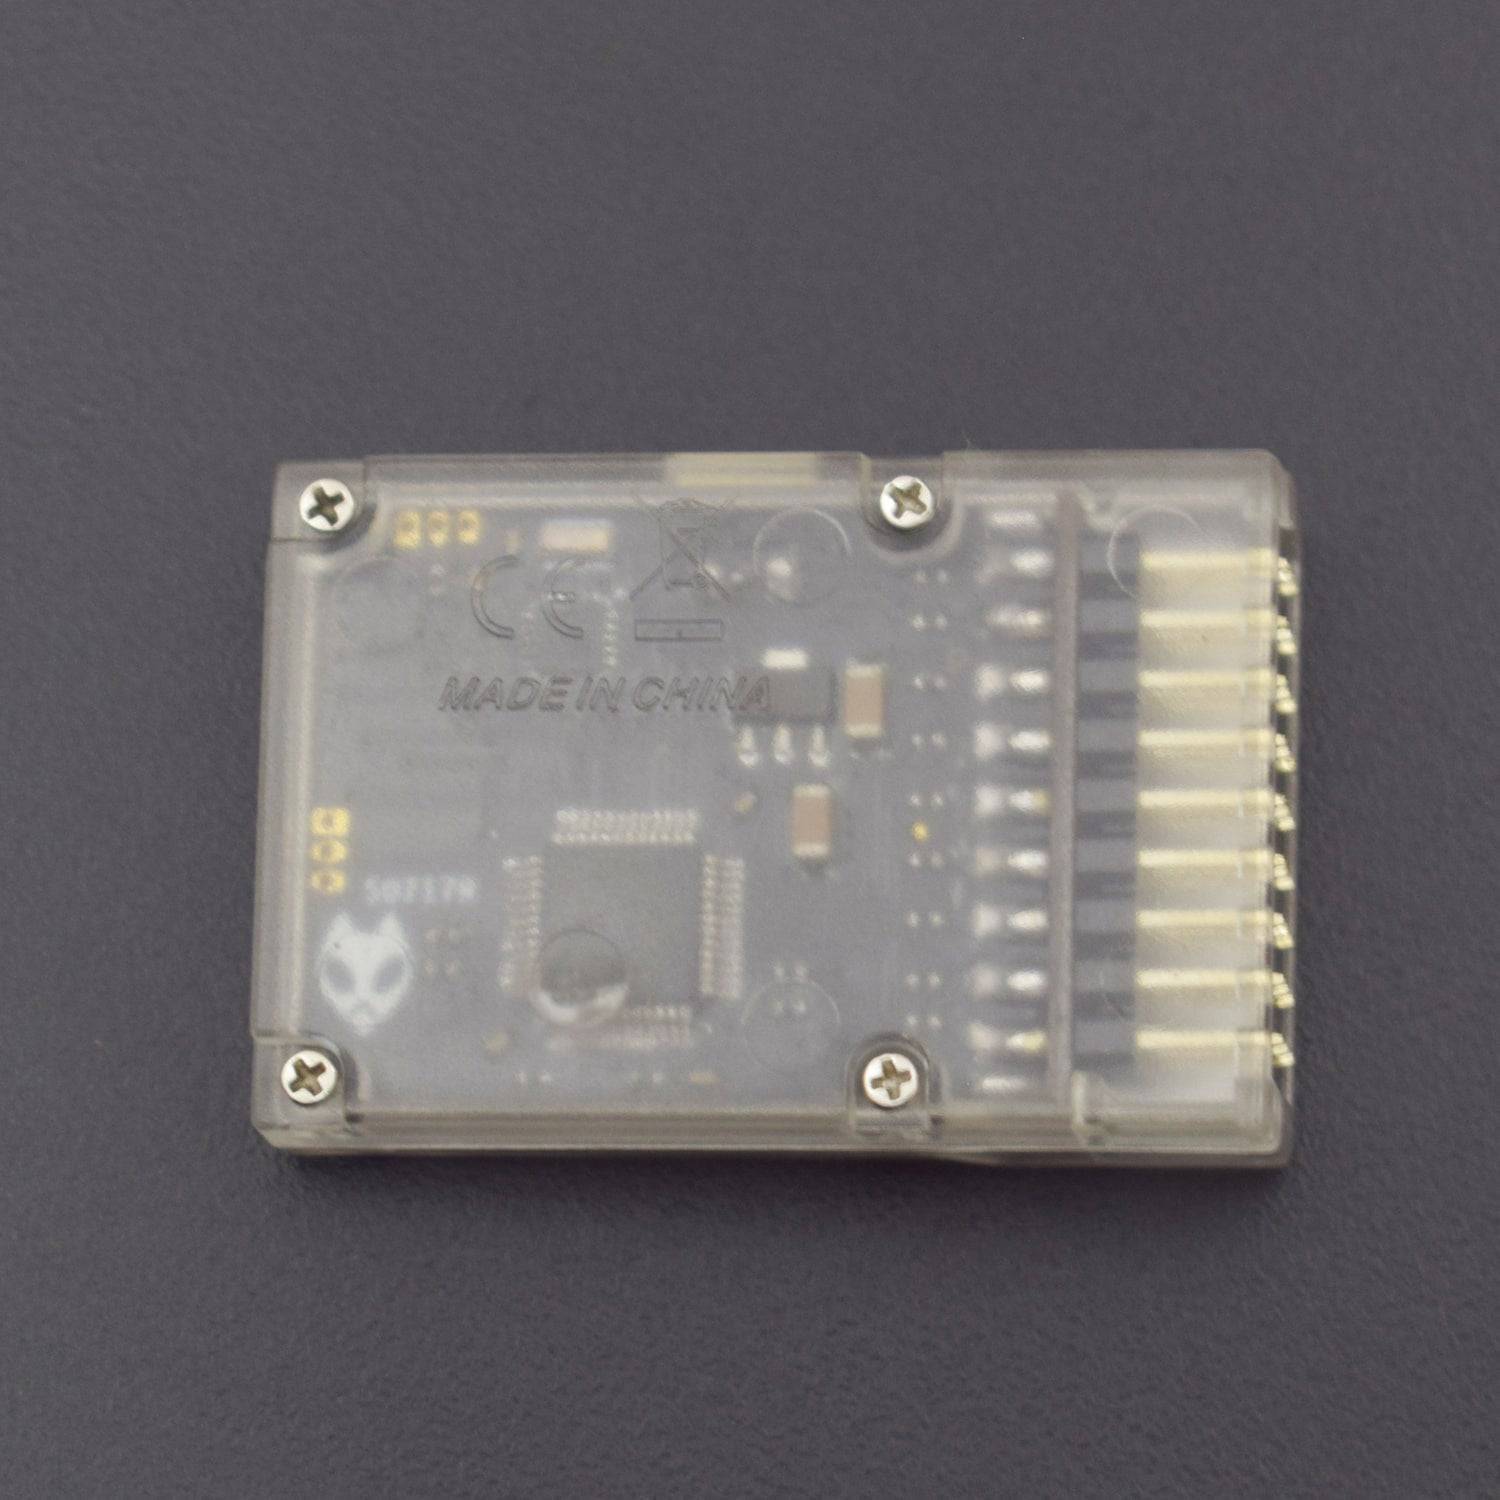 Stabilizer Flight Controller Board Builtin 3 axis Gyro For Quadcopter - QC009 - REES52